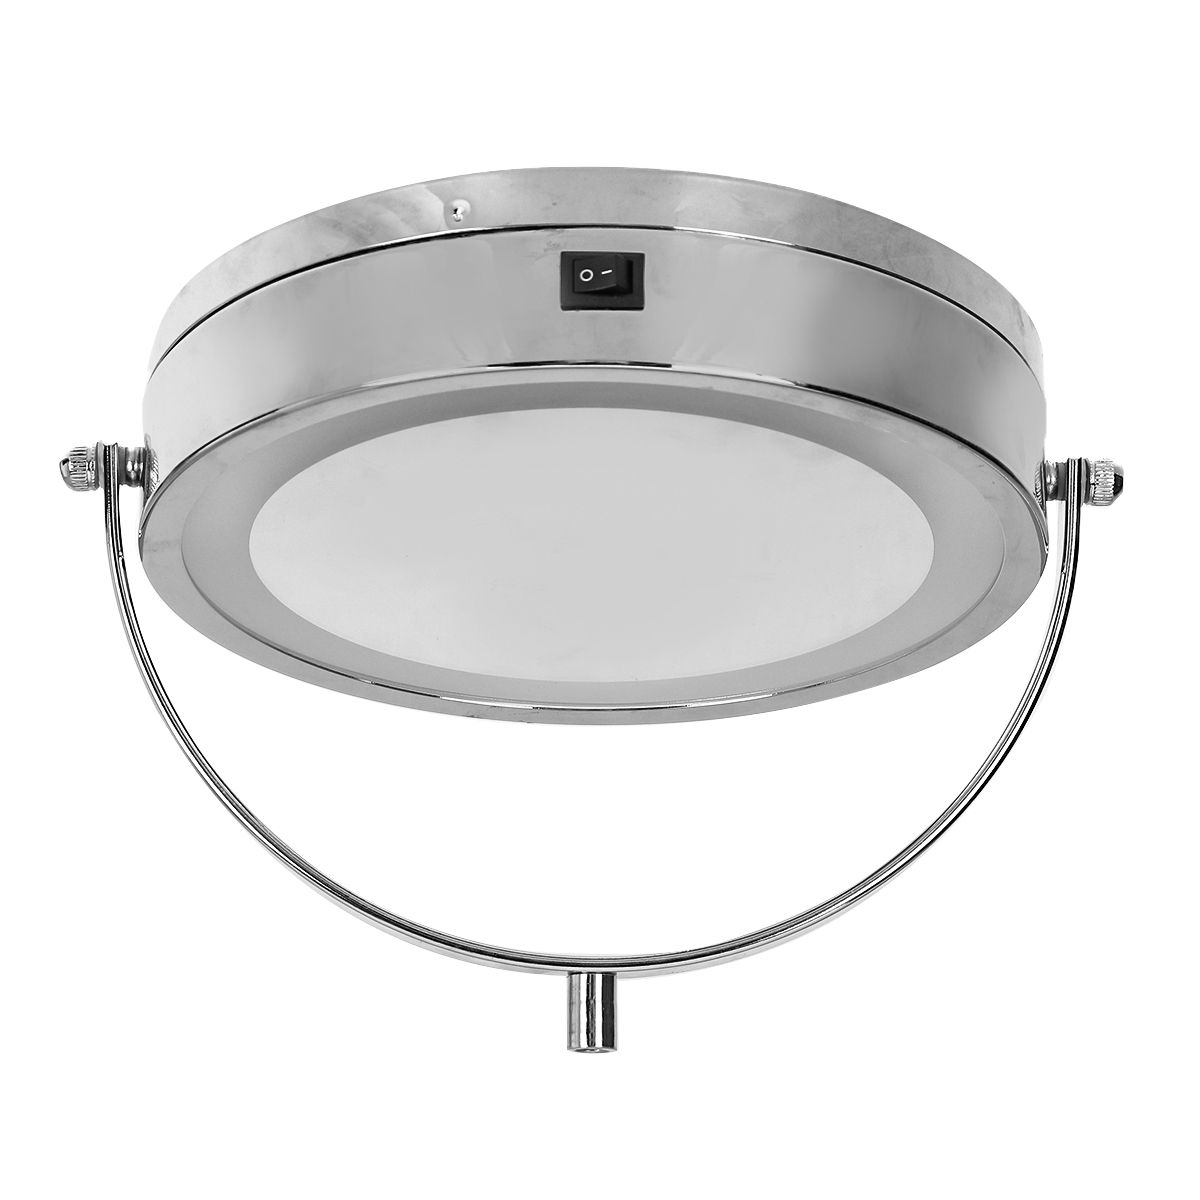 7-Inch-Folding-Telescopic-Bathroom-Makeup-Mirrors-With-LED-Wall-Mounted-3x-Magnifying-1676585